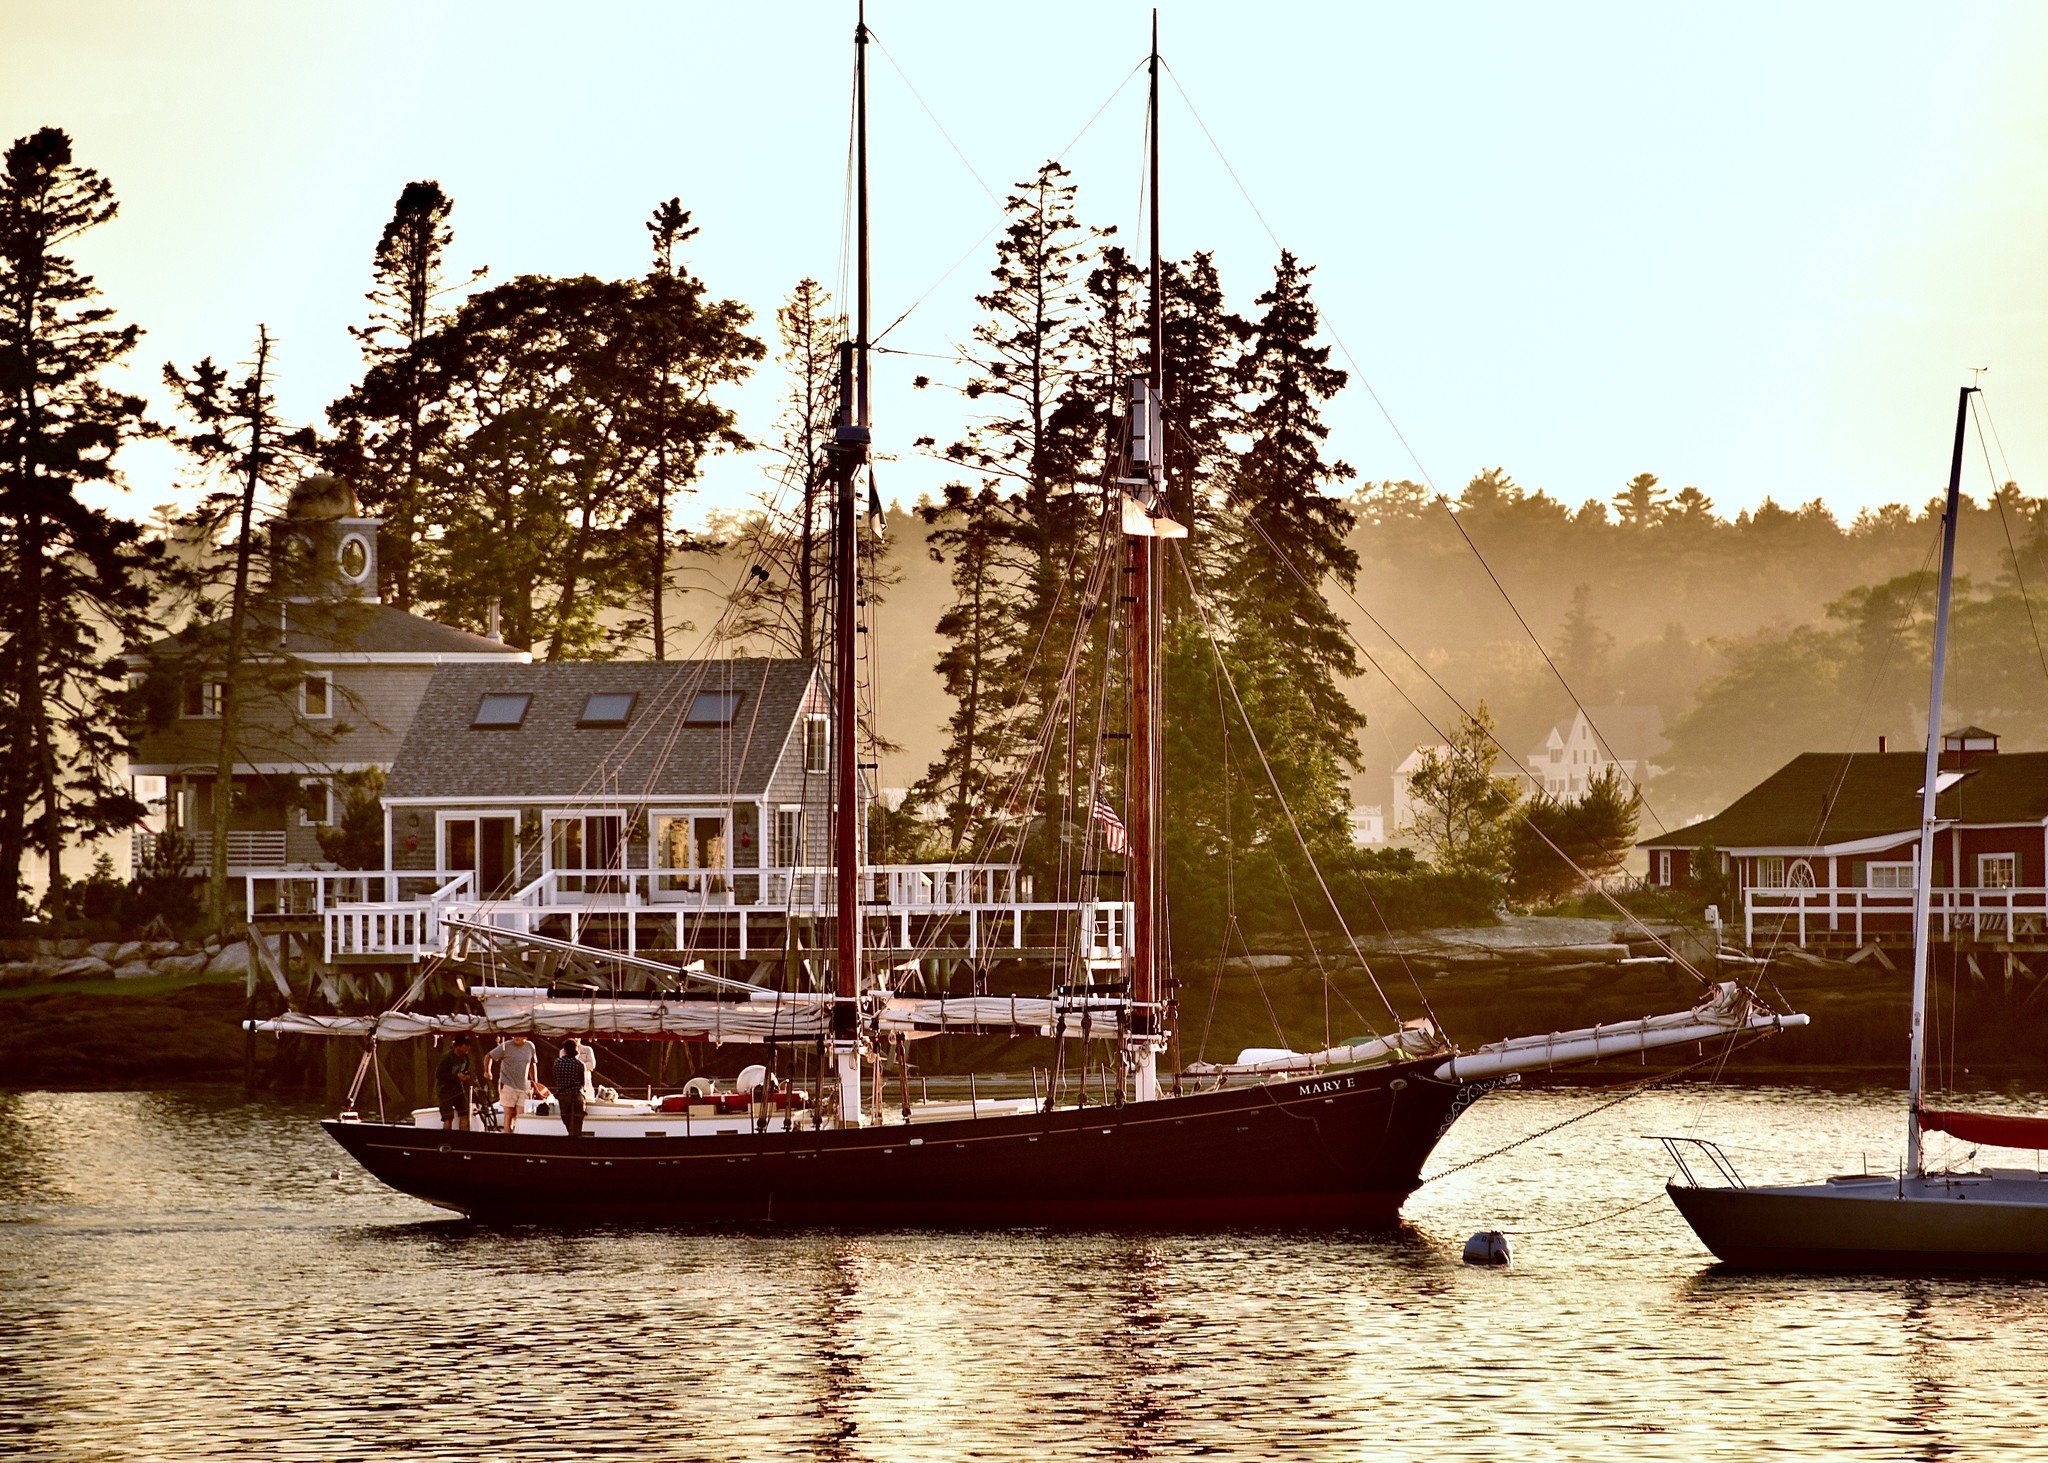 Boothbay in a day  Green & Healthy Maine magazine – Happy, healthy,  sustainable